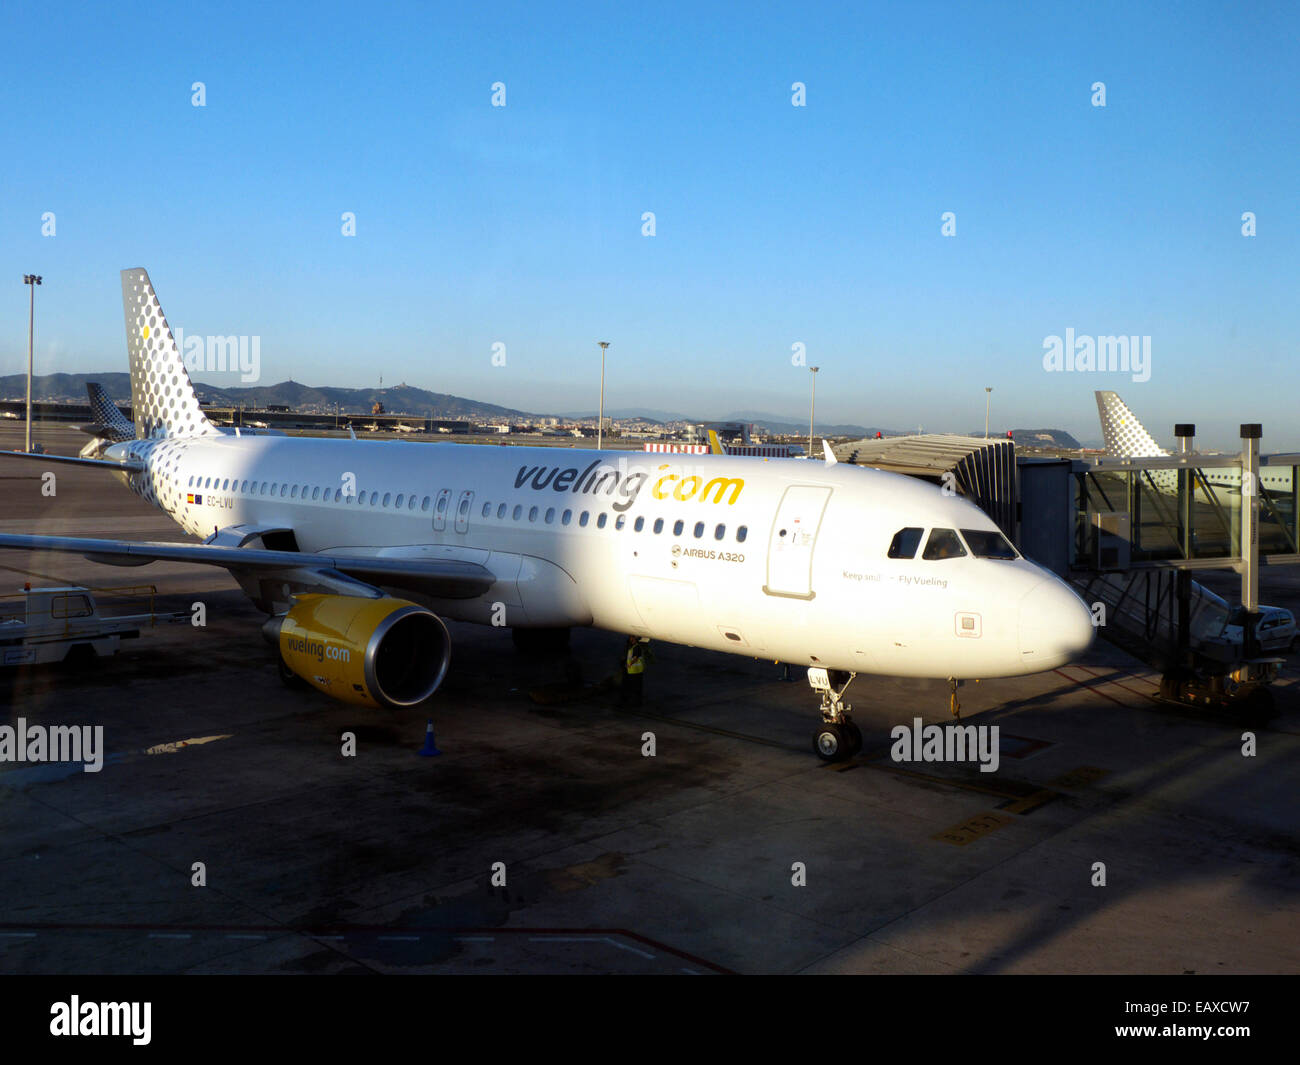 Spanish airline Veuling airplane landed Stock Photo